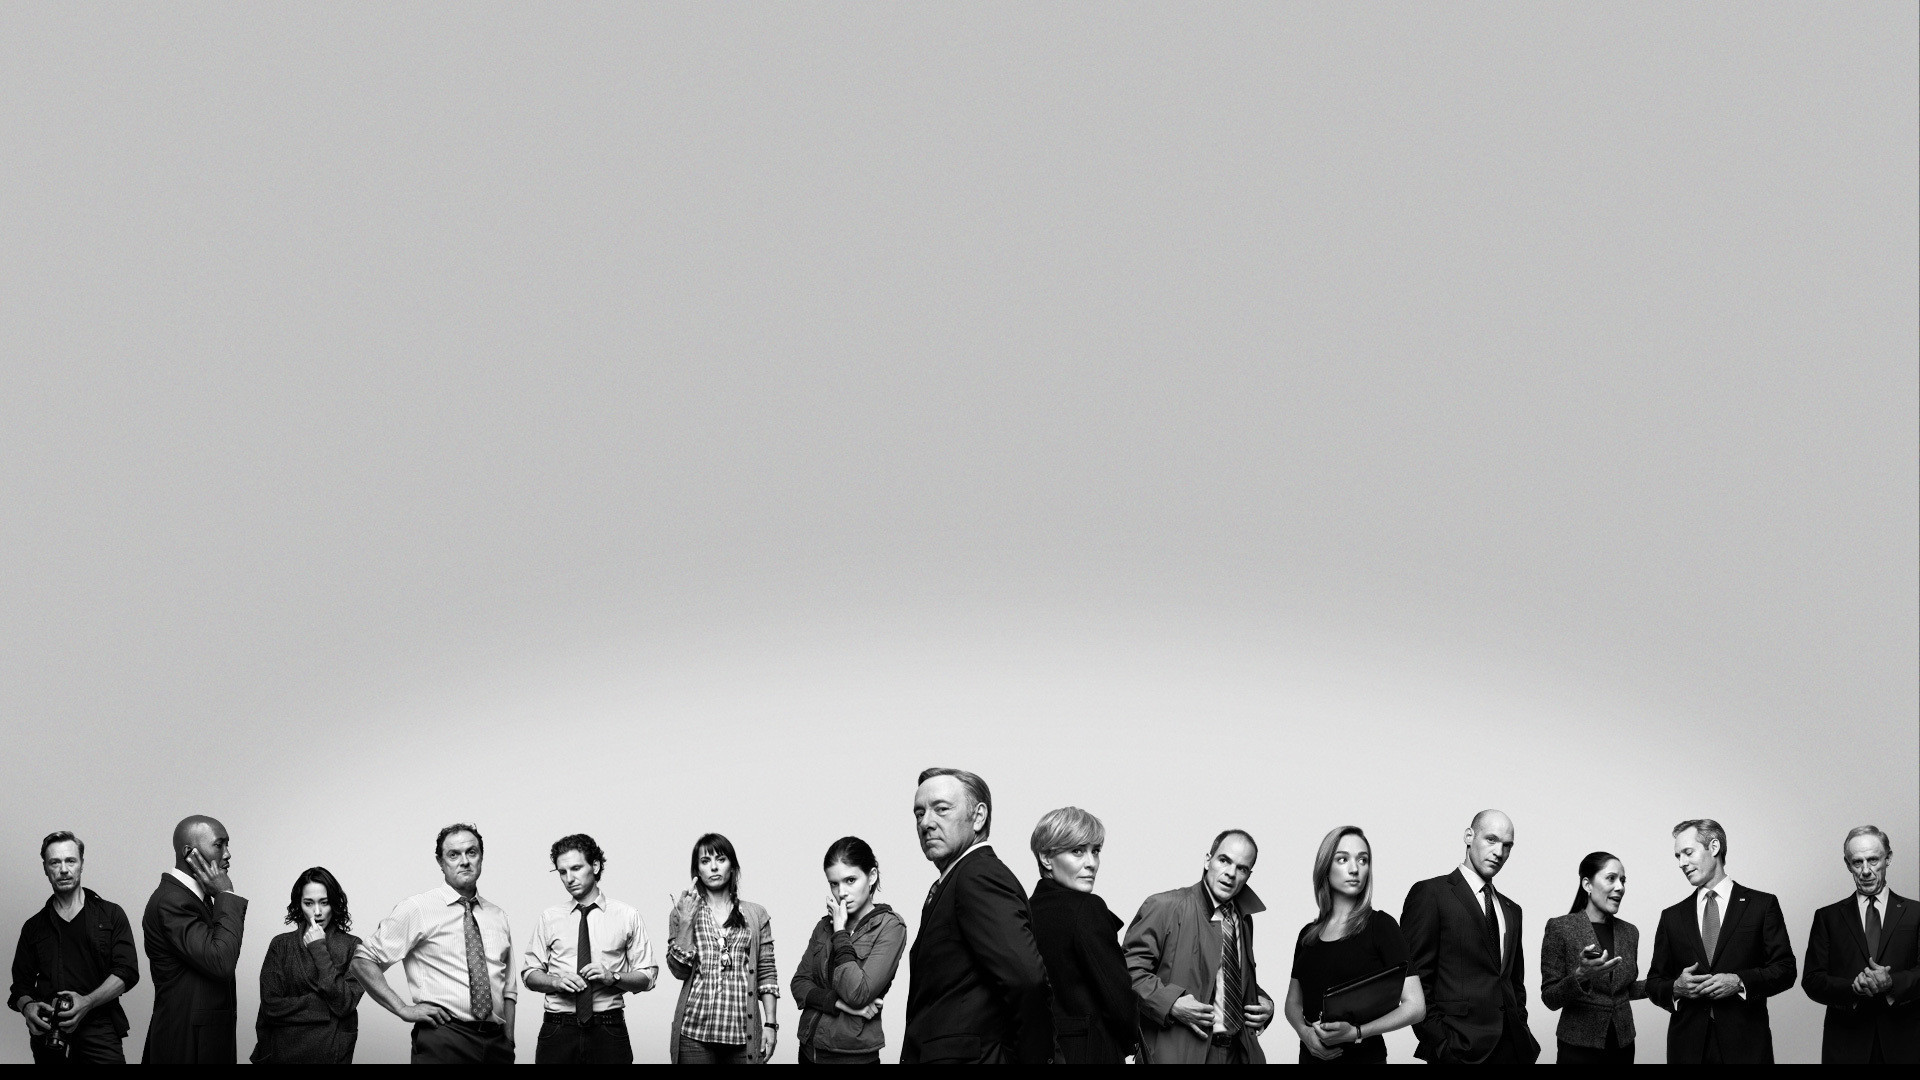 1920x1080 House Of Cards Computer Wallpapers, Desktop Backgrounds |  .